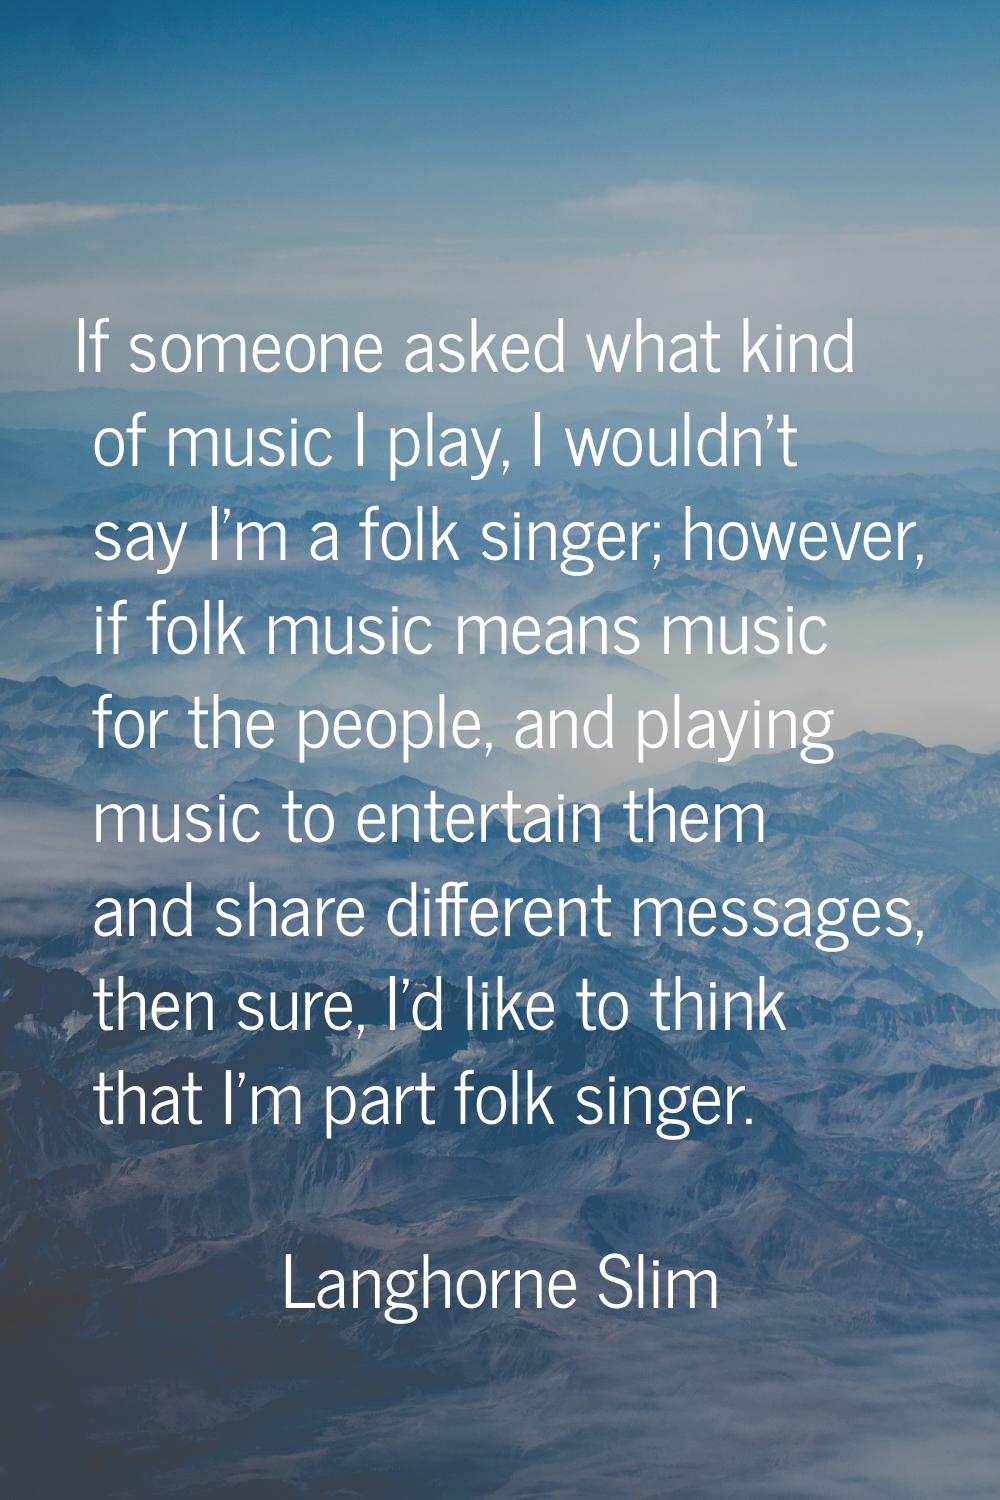 If someone asked what kind of music I play, I wouldn't say I'm a folk singer; however, if folk musi